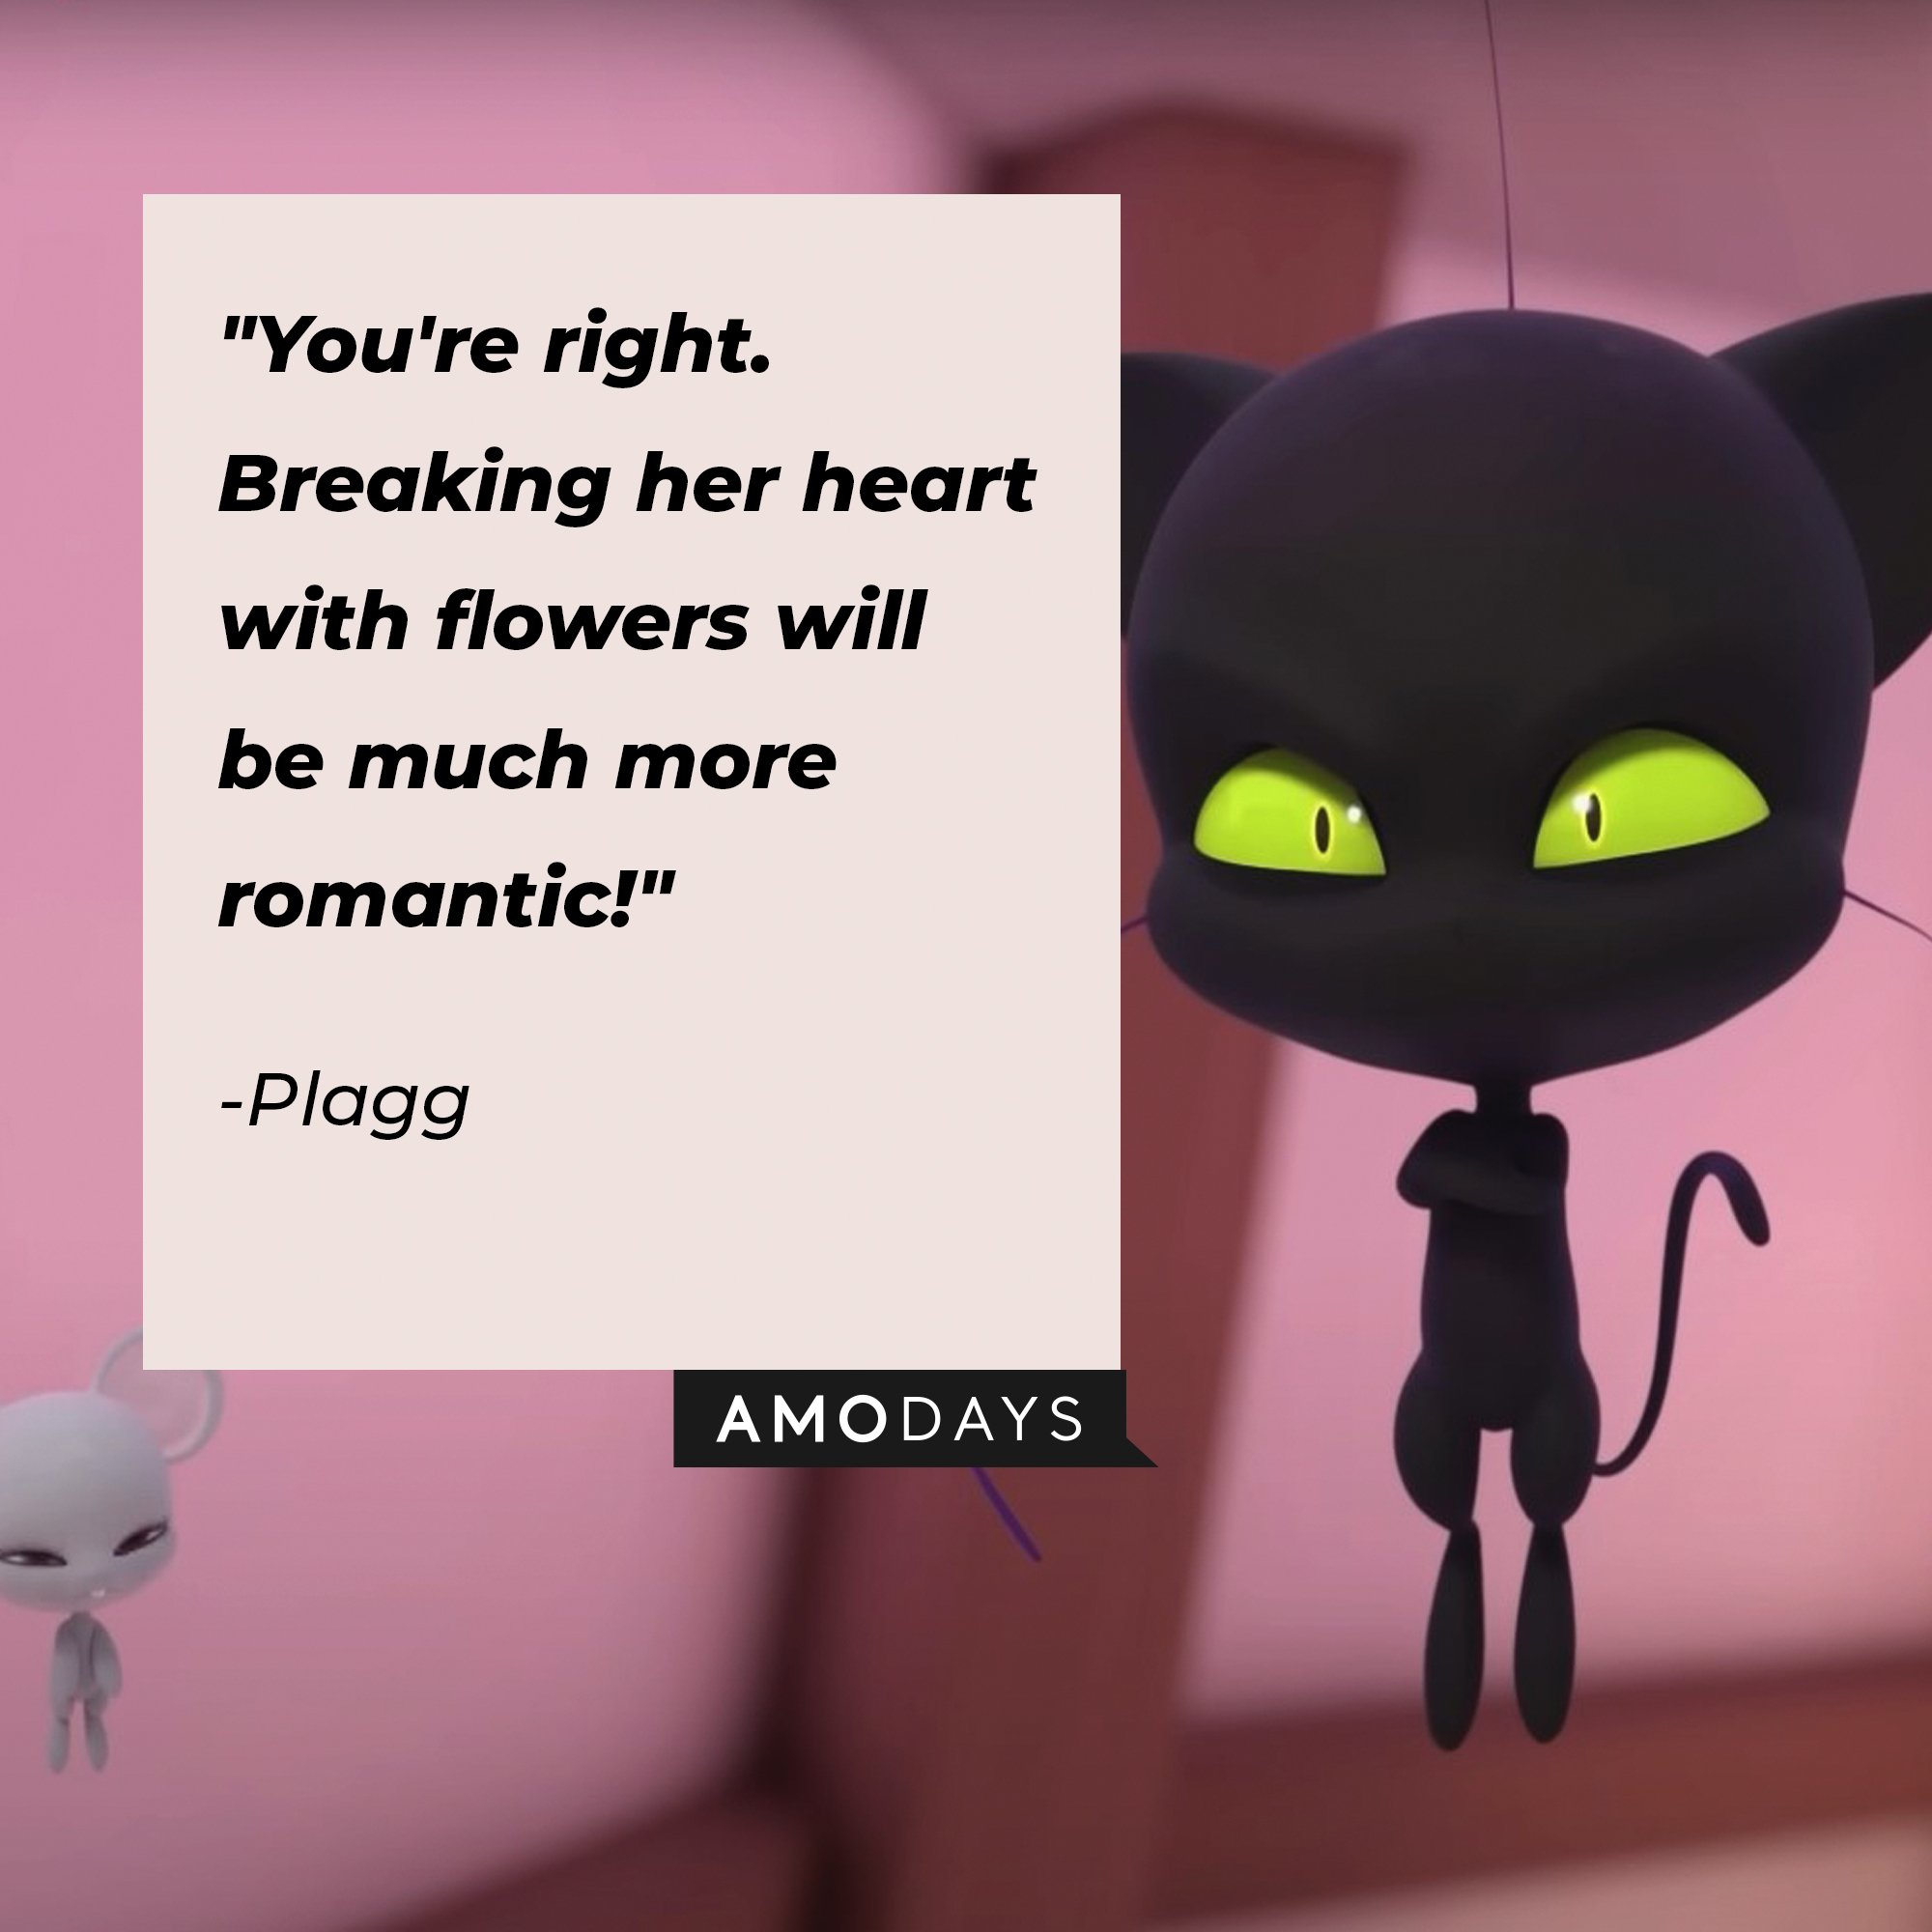 Plagg’s quote: "You're right. Breaking her heart with flowers will be much more romantic!" | Image: AmoDays